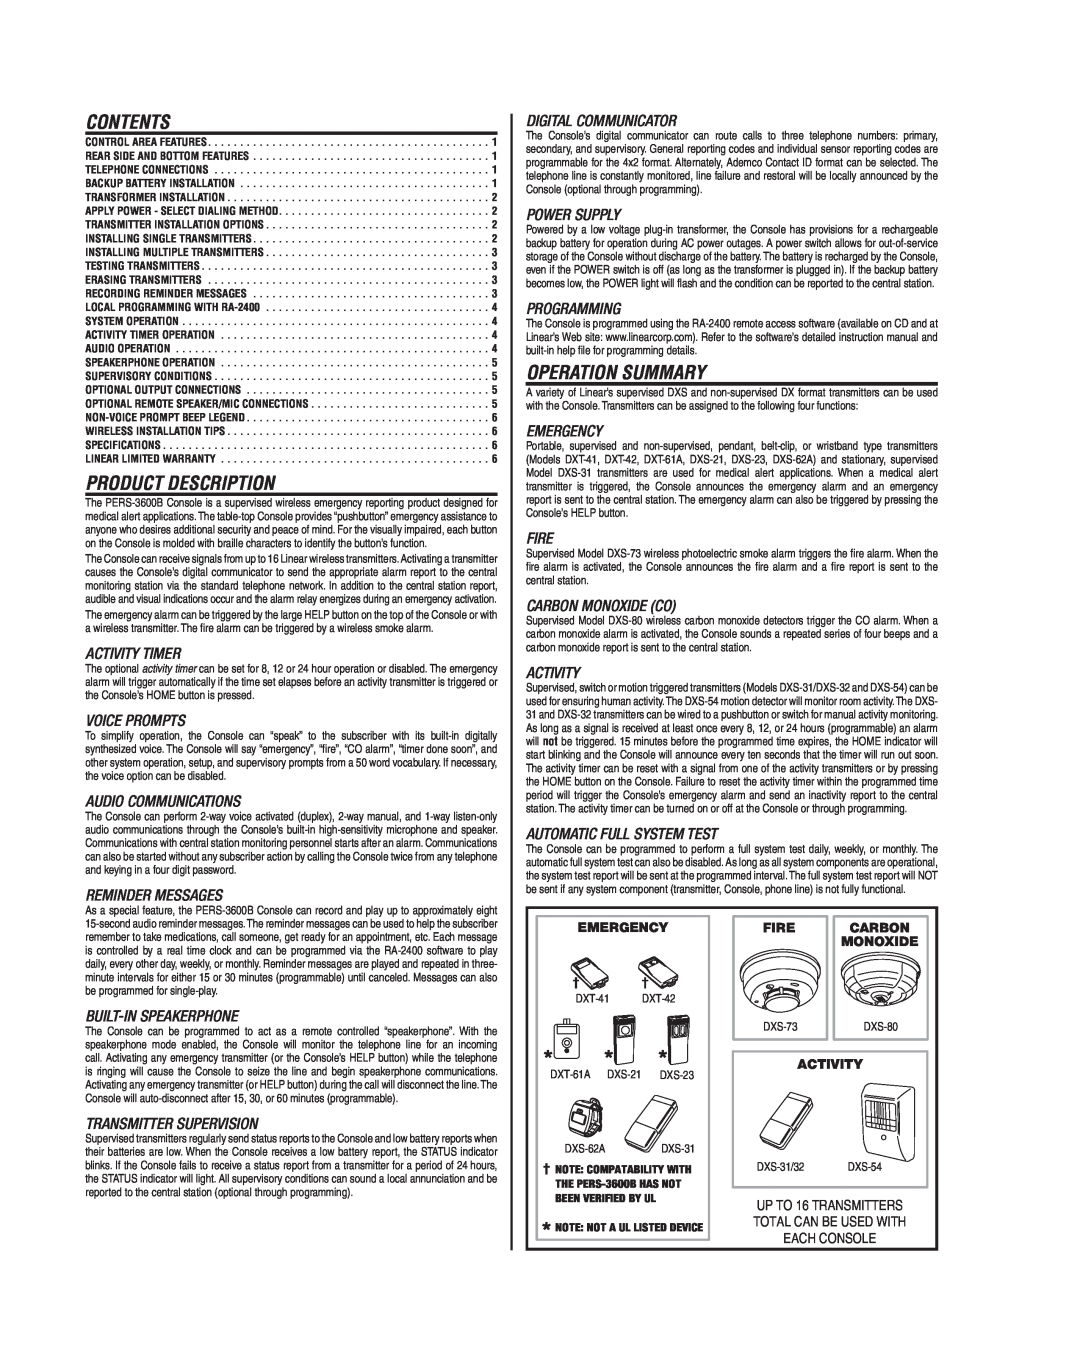 Niles Audio PERS-3600B manual Contents, Product Description, Operation Summary 